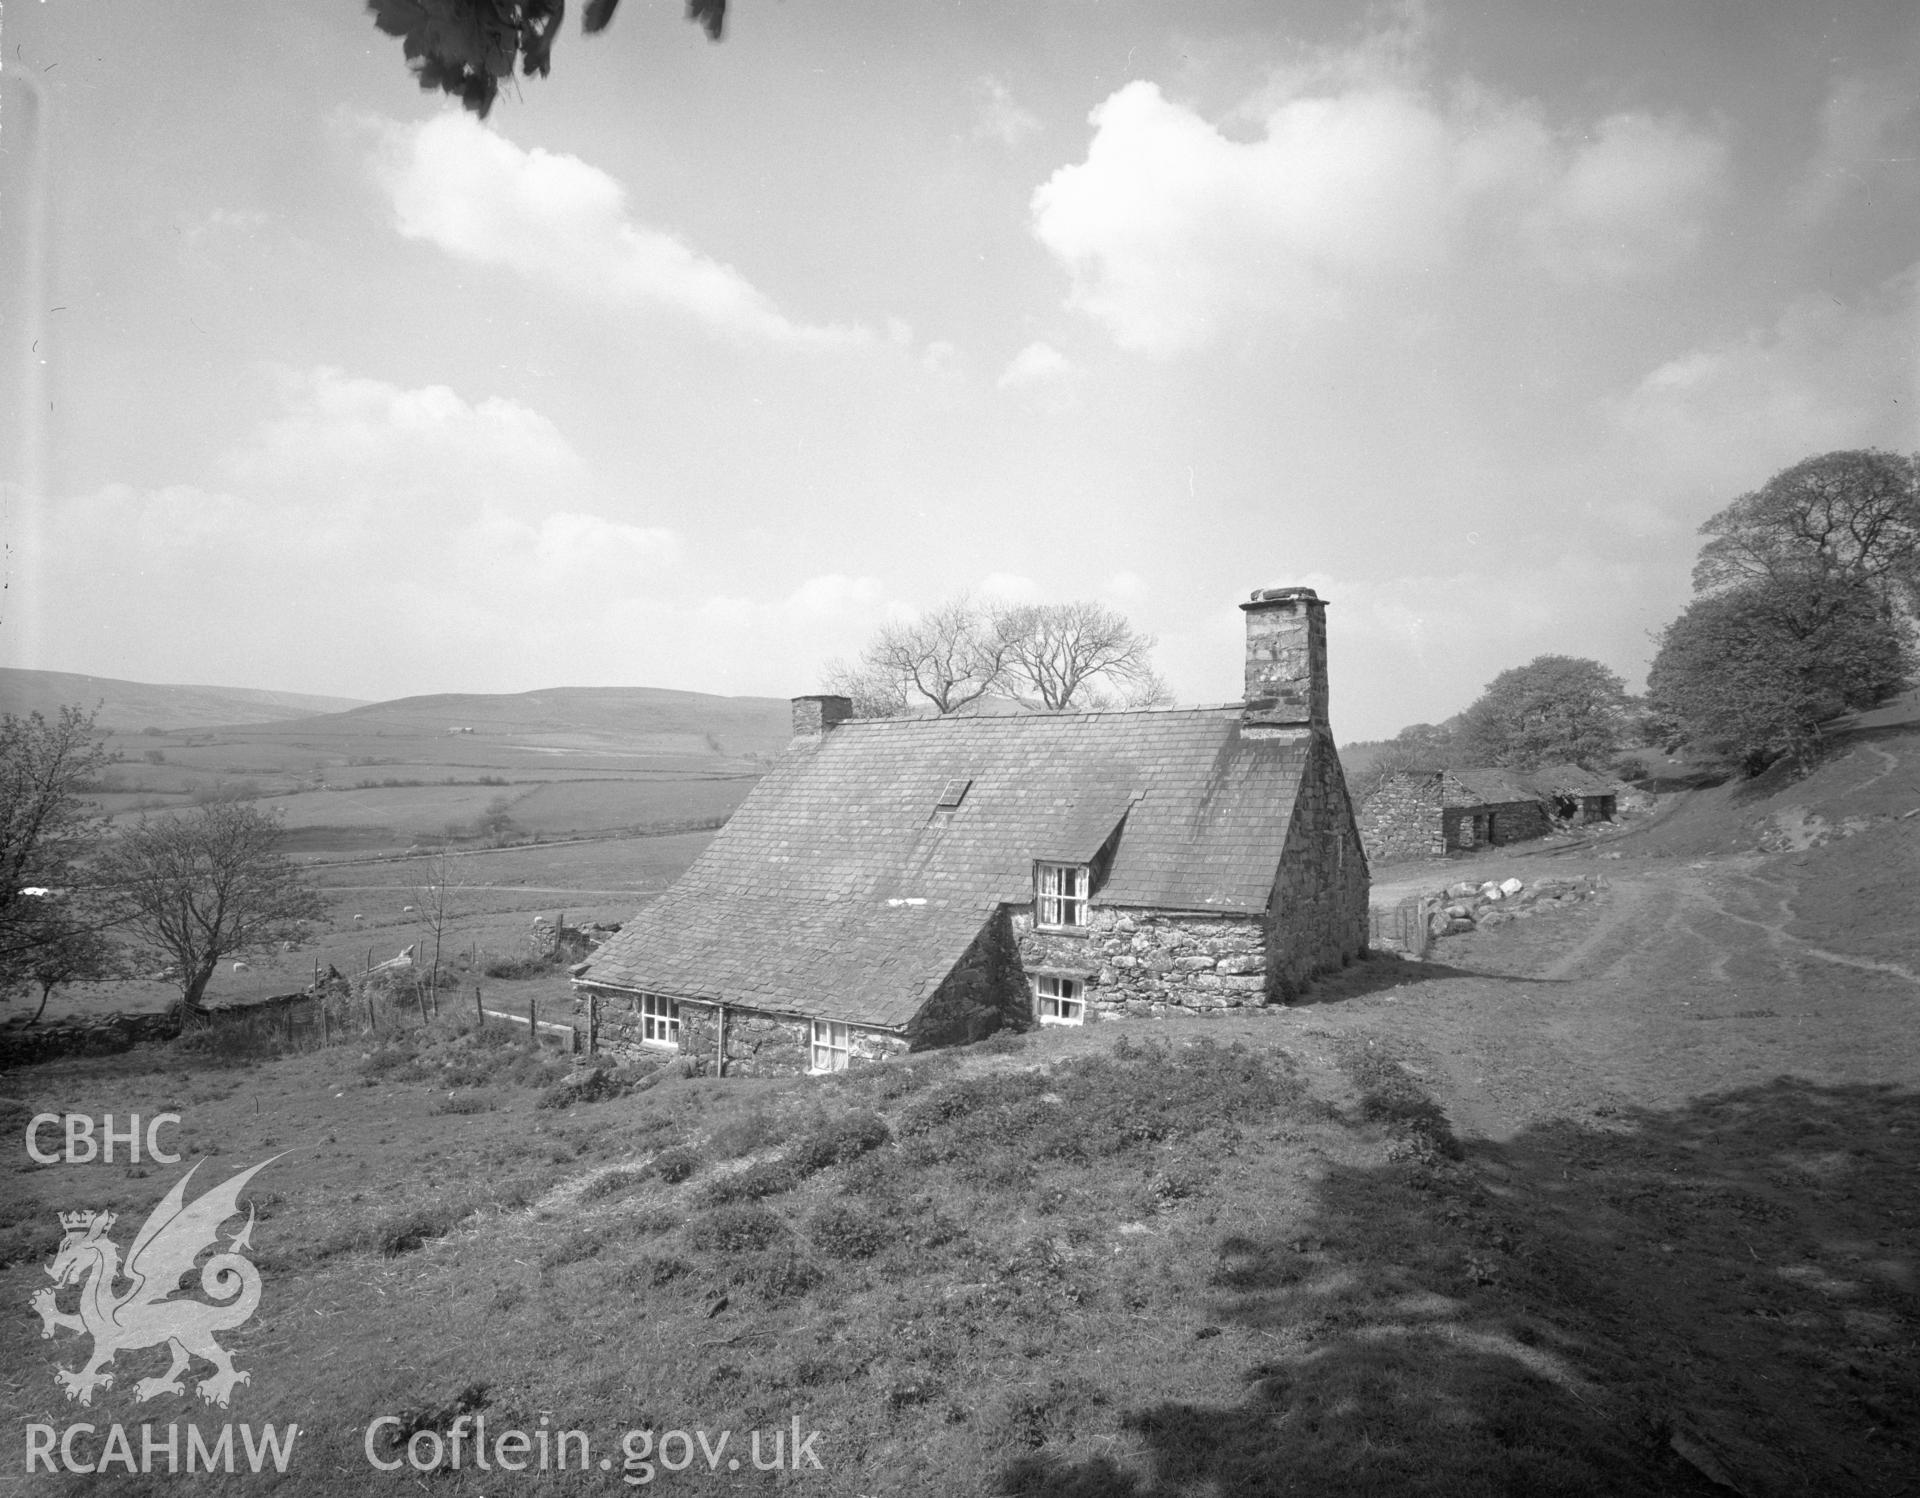 Digital copy of an acetate negative showing general view of Ty Cerrig.